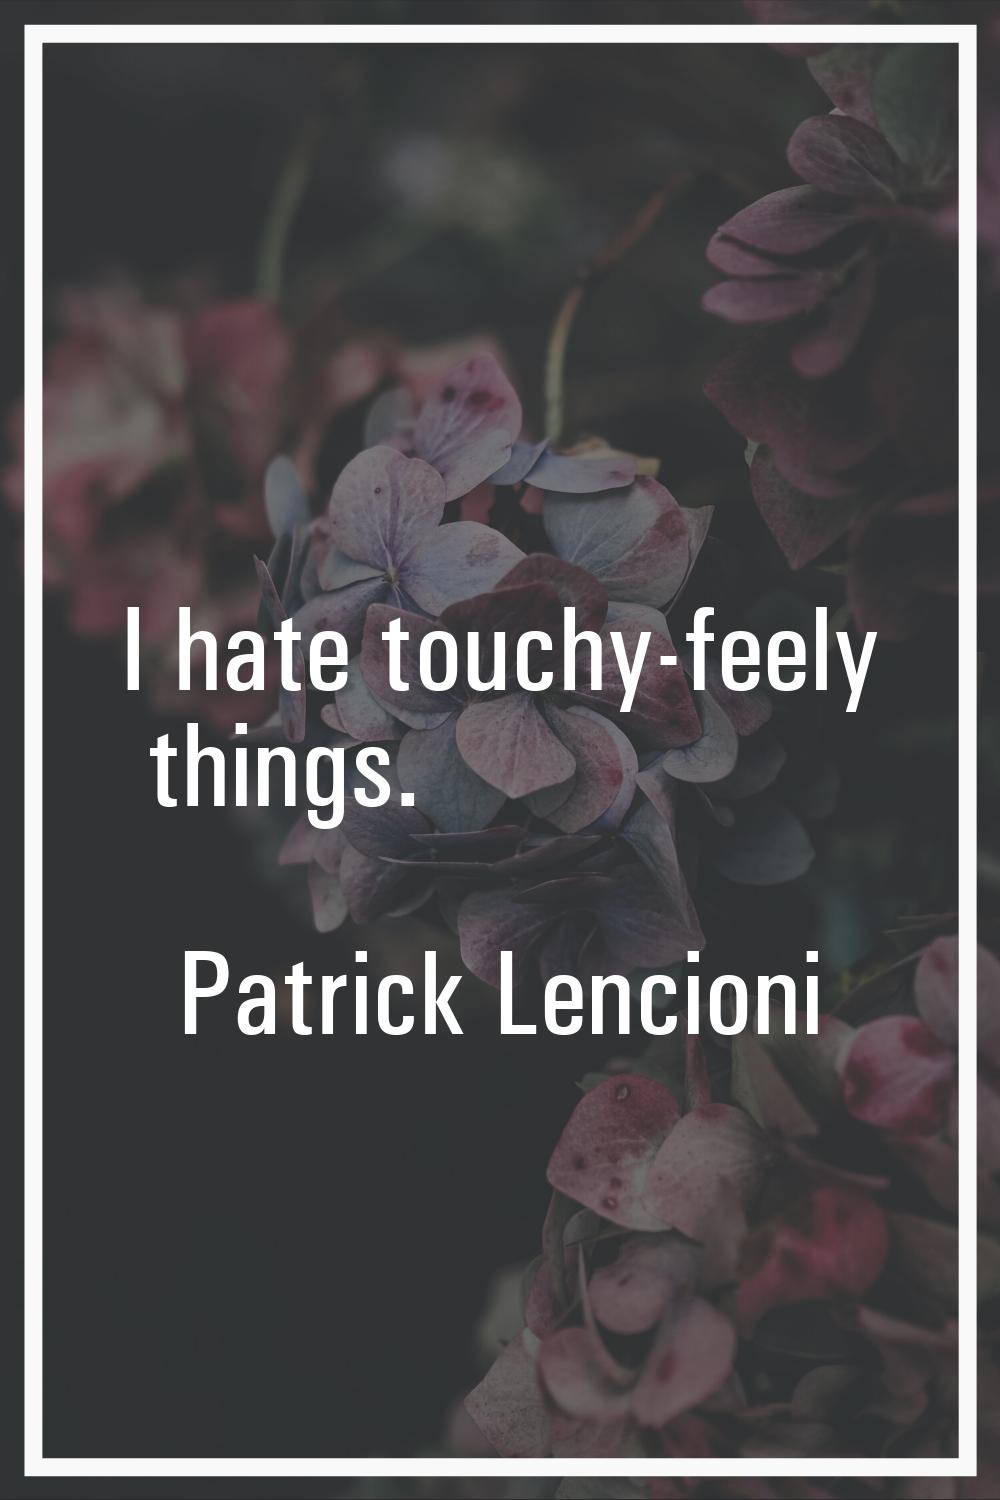 I hate touchy-feely things.